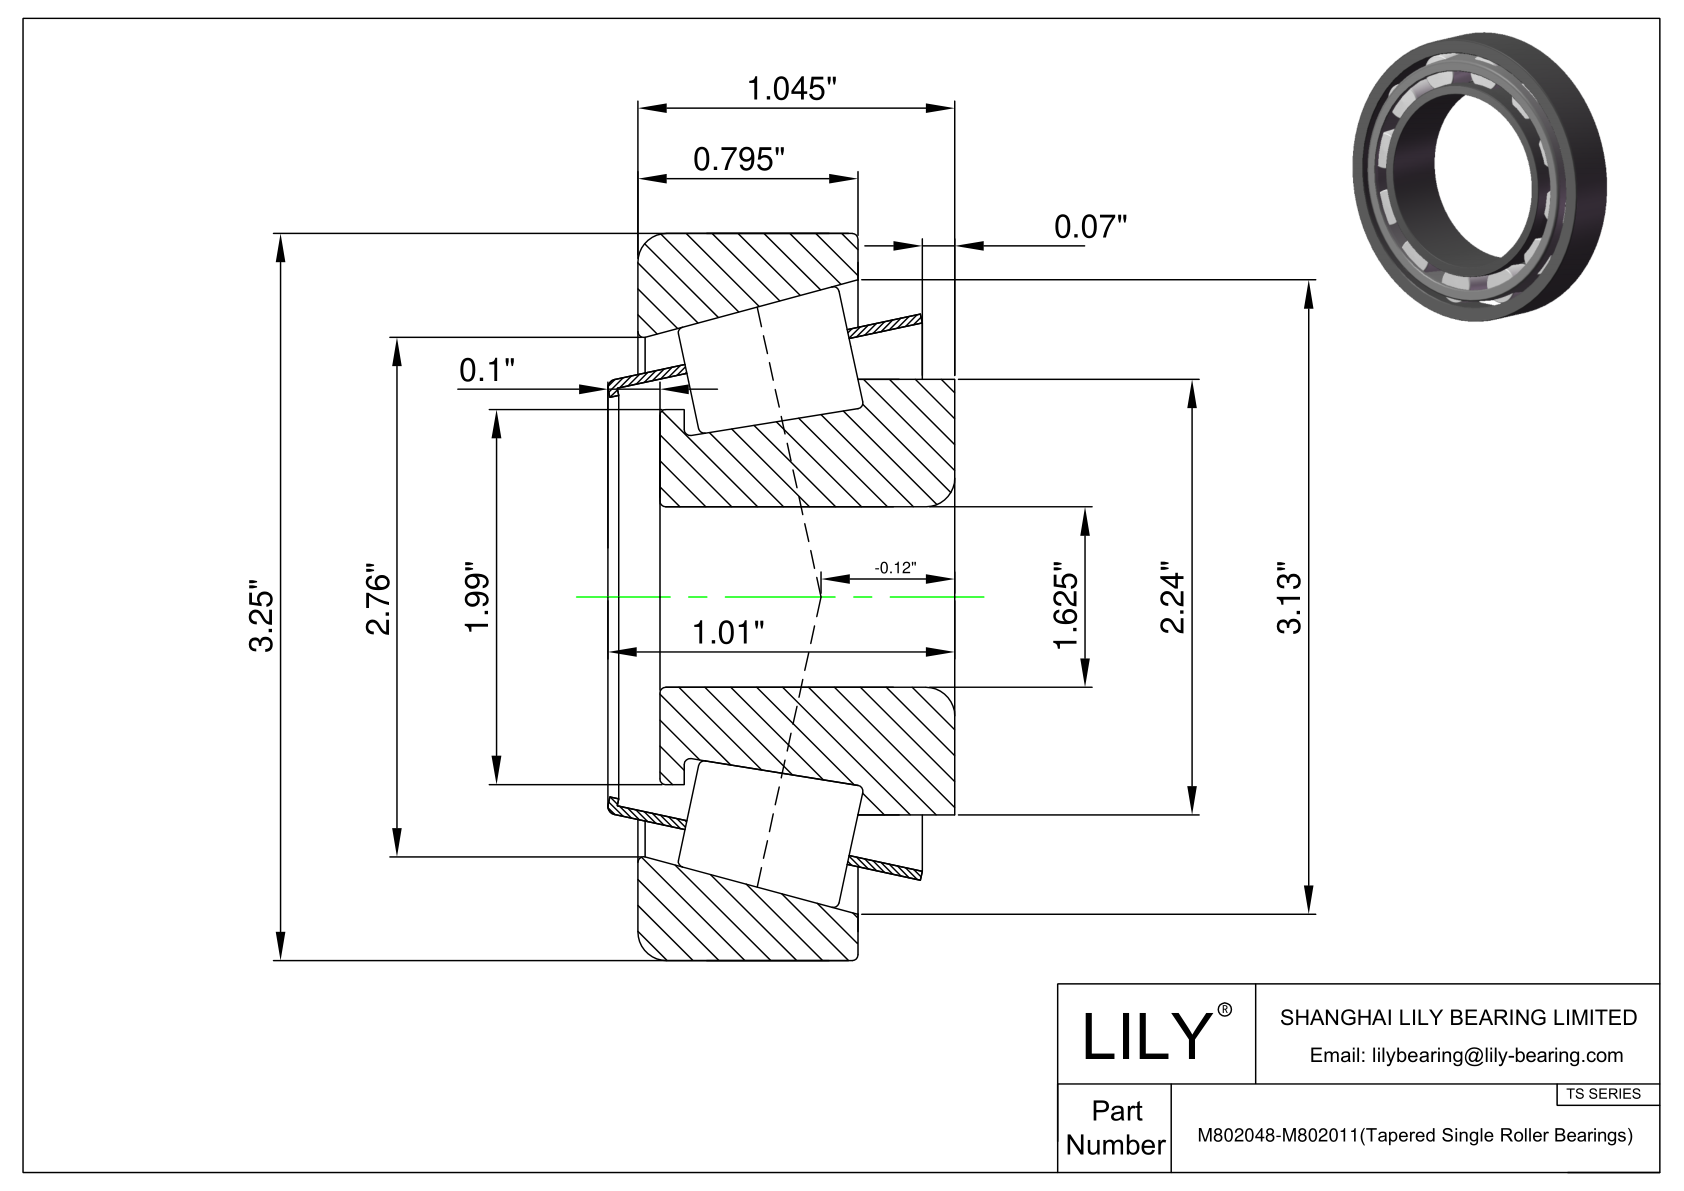 M802048-M802011 TS (Tapered Single Roller Bearings) (Imperial) cad drawing